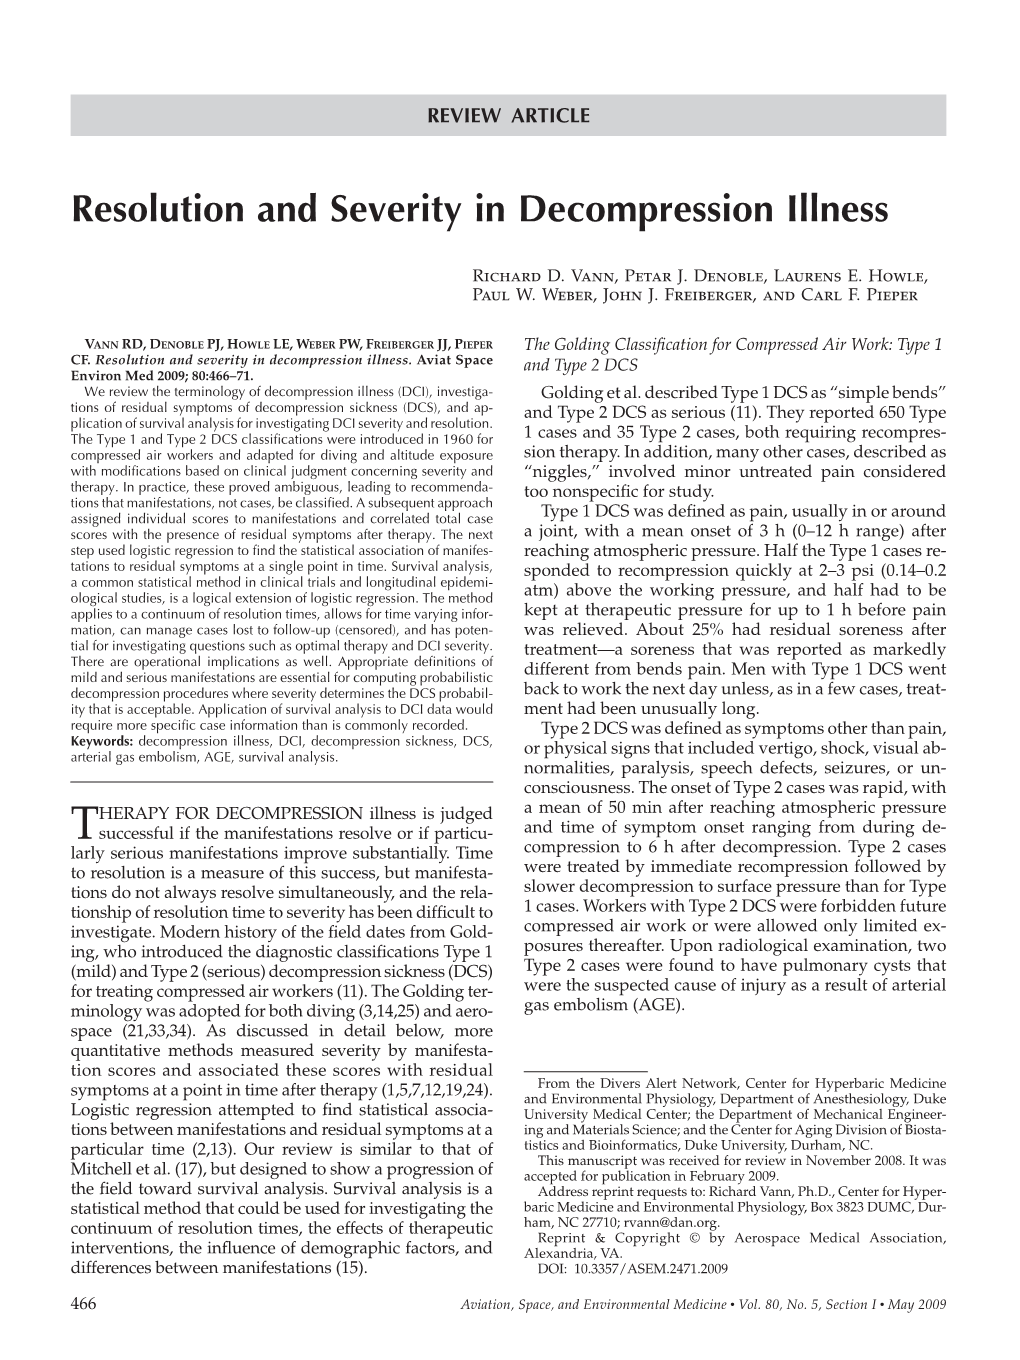 Resolution and Severity in Decompression Illness. Aviat Space and Type 2 DCS Environ Med 2009; 80: 466 – 71